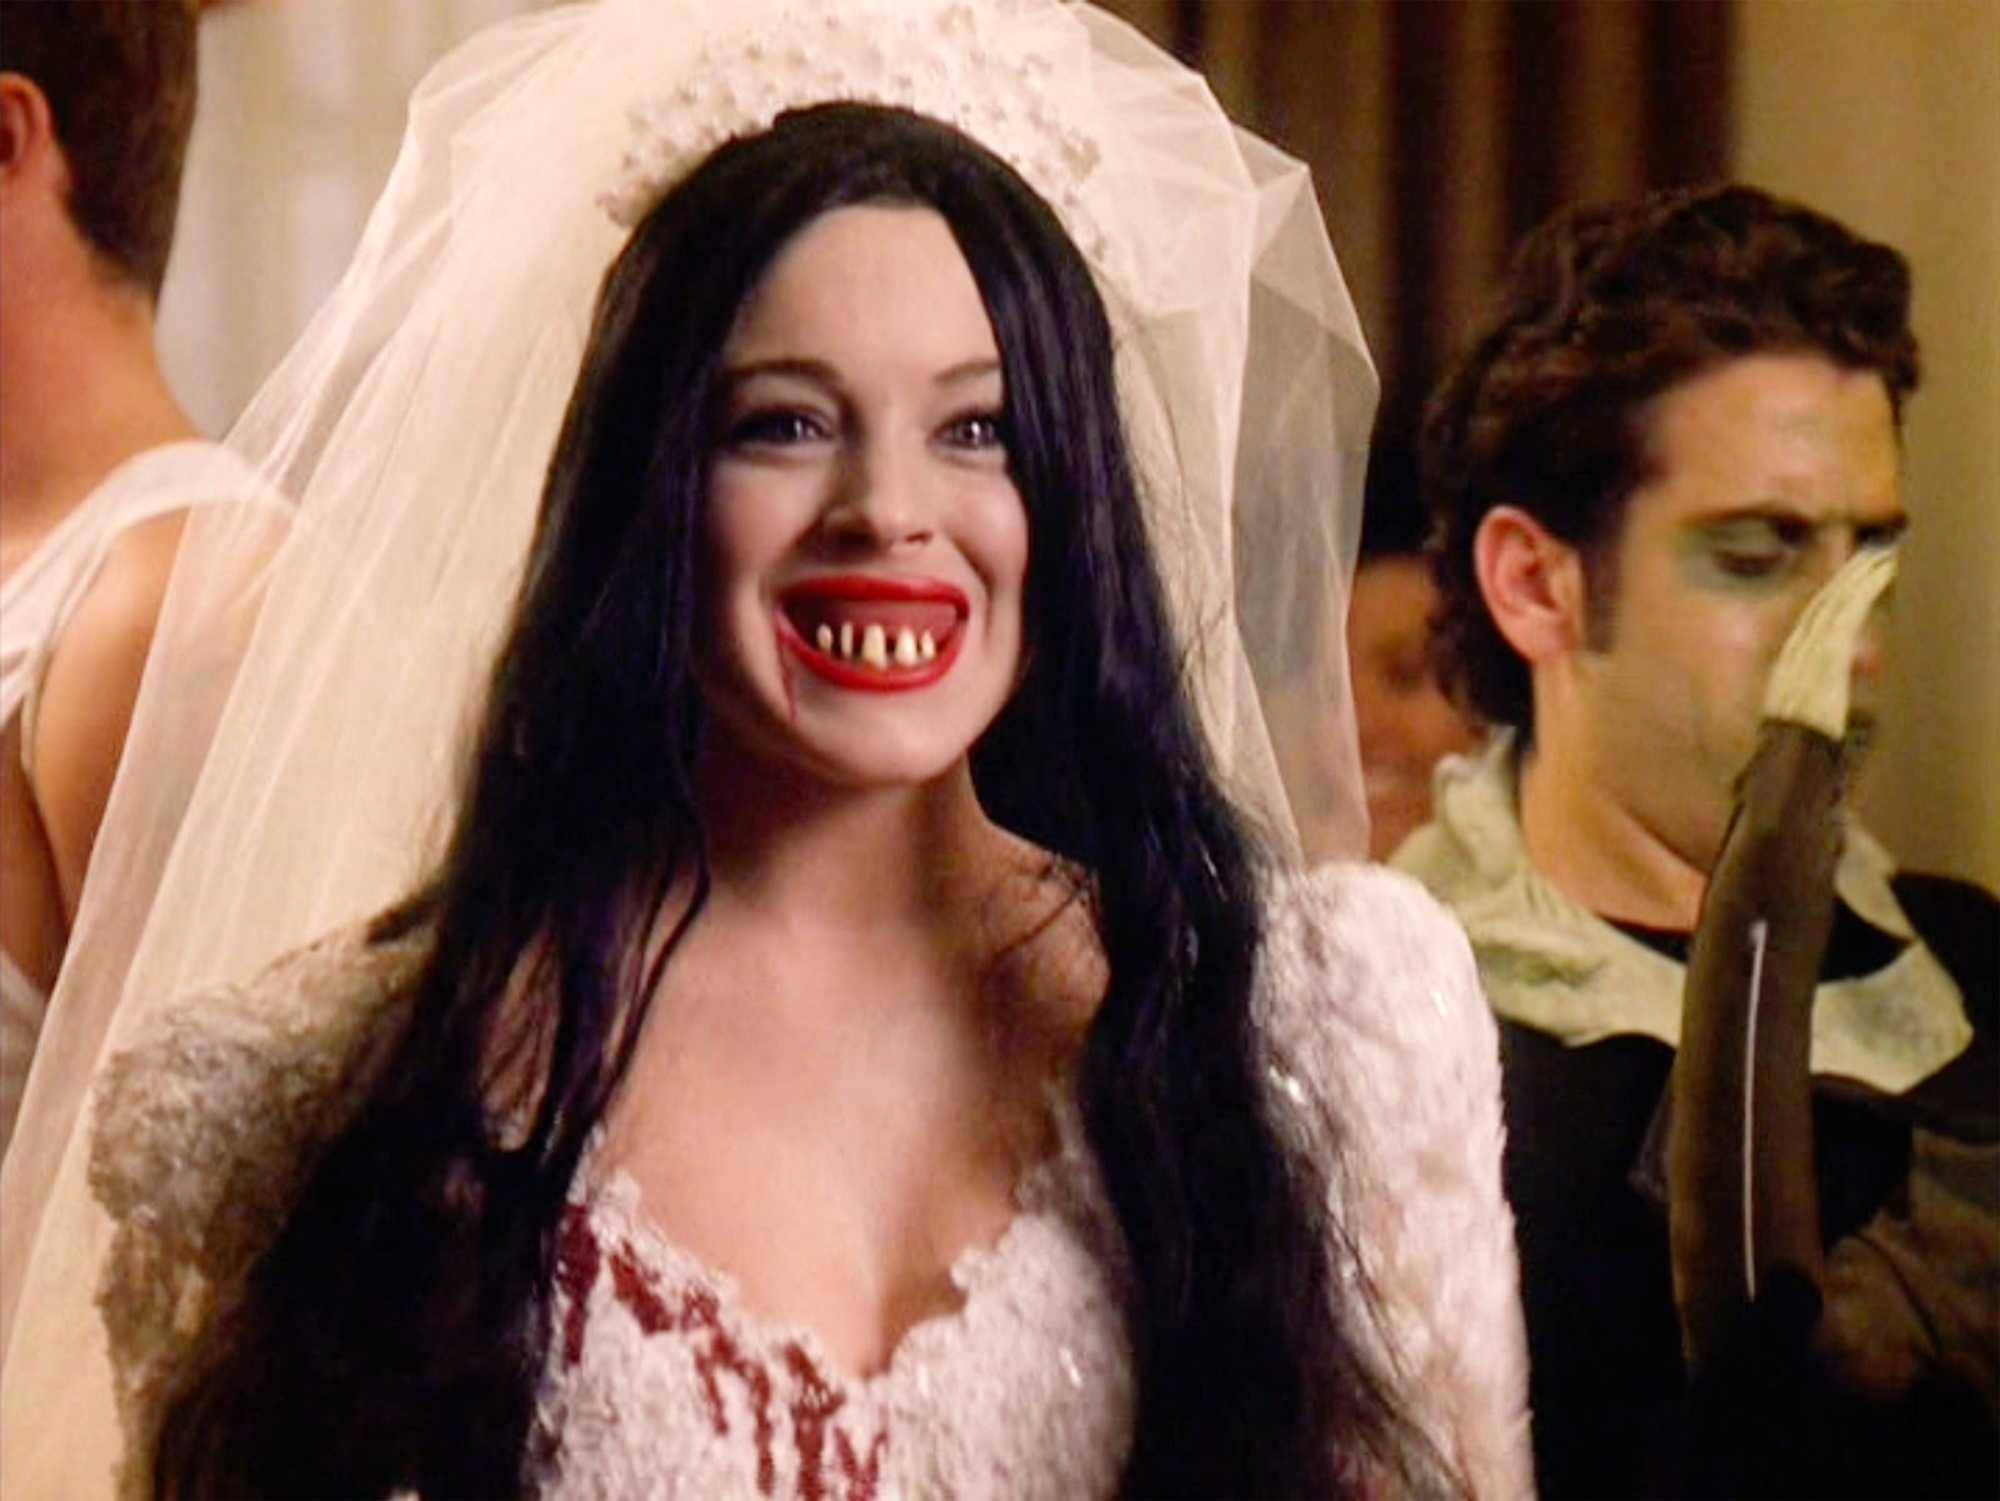 she&#x27;s got fake teeth in and fake blood on the dress